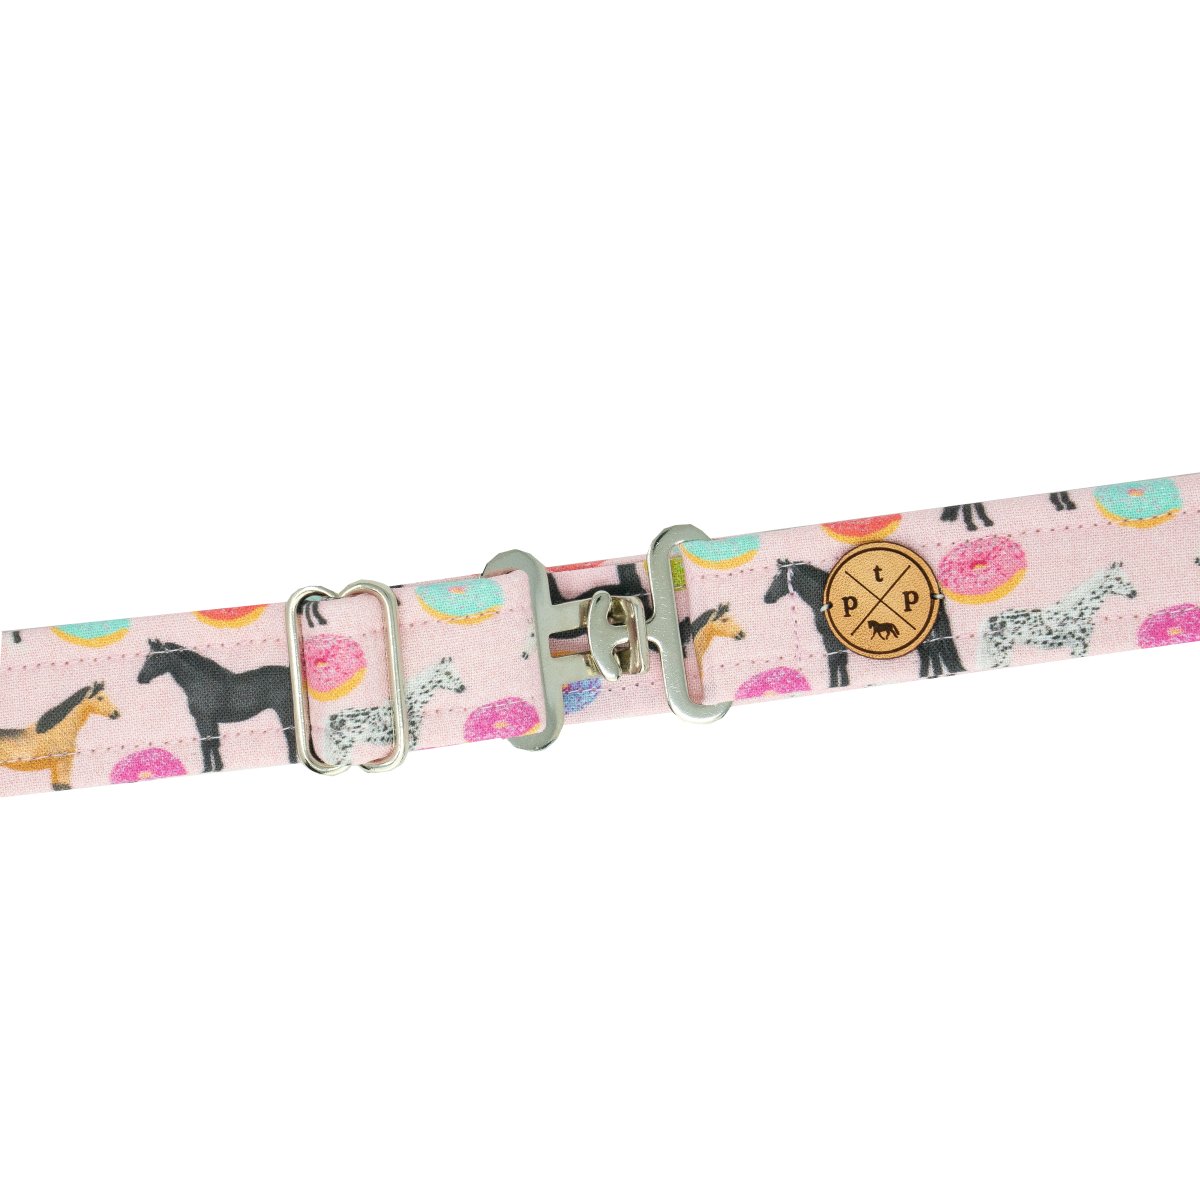 Donut Dreams (Pink) Belt - Equiluxe Tack